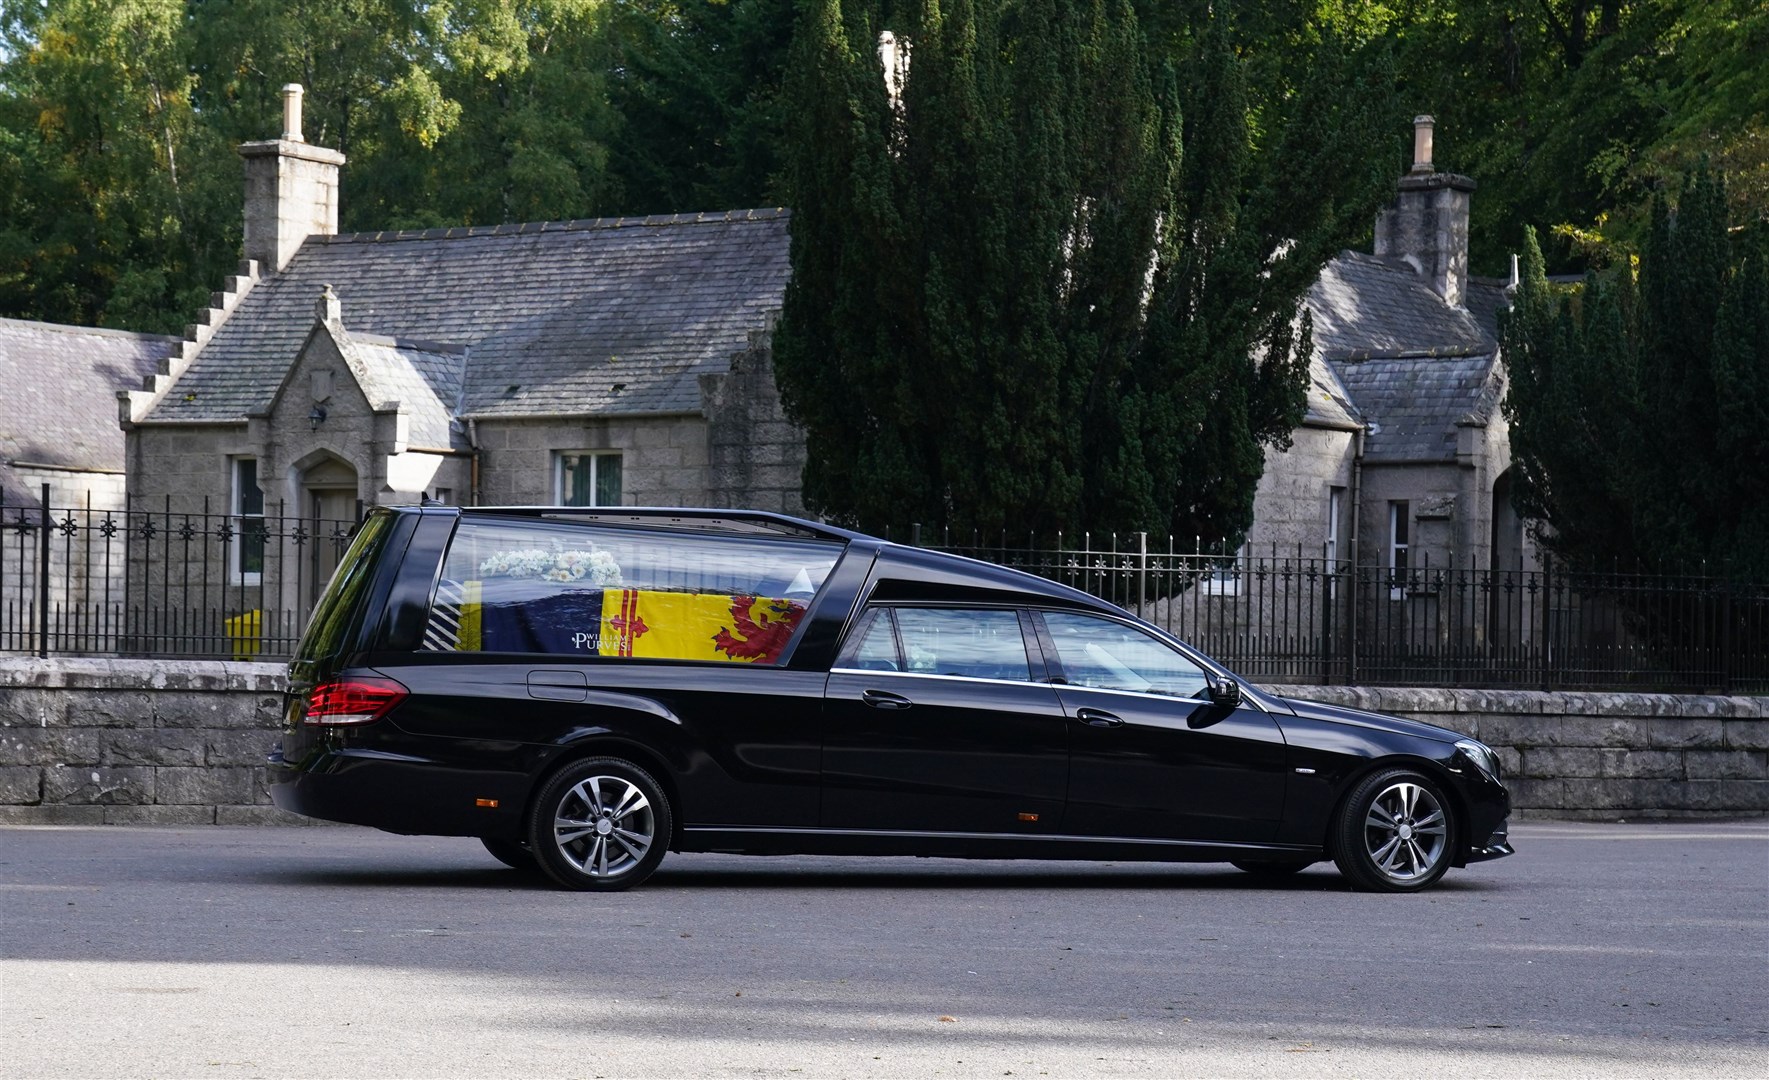 The Queen died peacefully at Balmoral on September 8, triggering an outpouring of grief both nationally and internationally. Here, the hearse carrying her coffin leaves Balmoral, en route to the Palace of Holyroodhouse in Edinburgh (Owen Humphreys/PA)